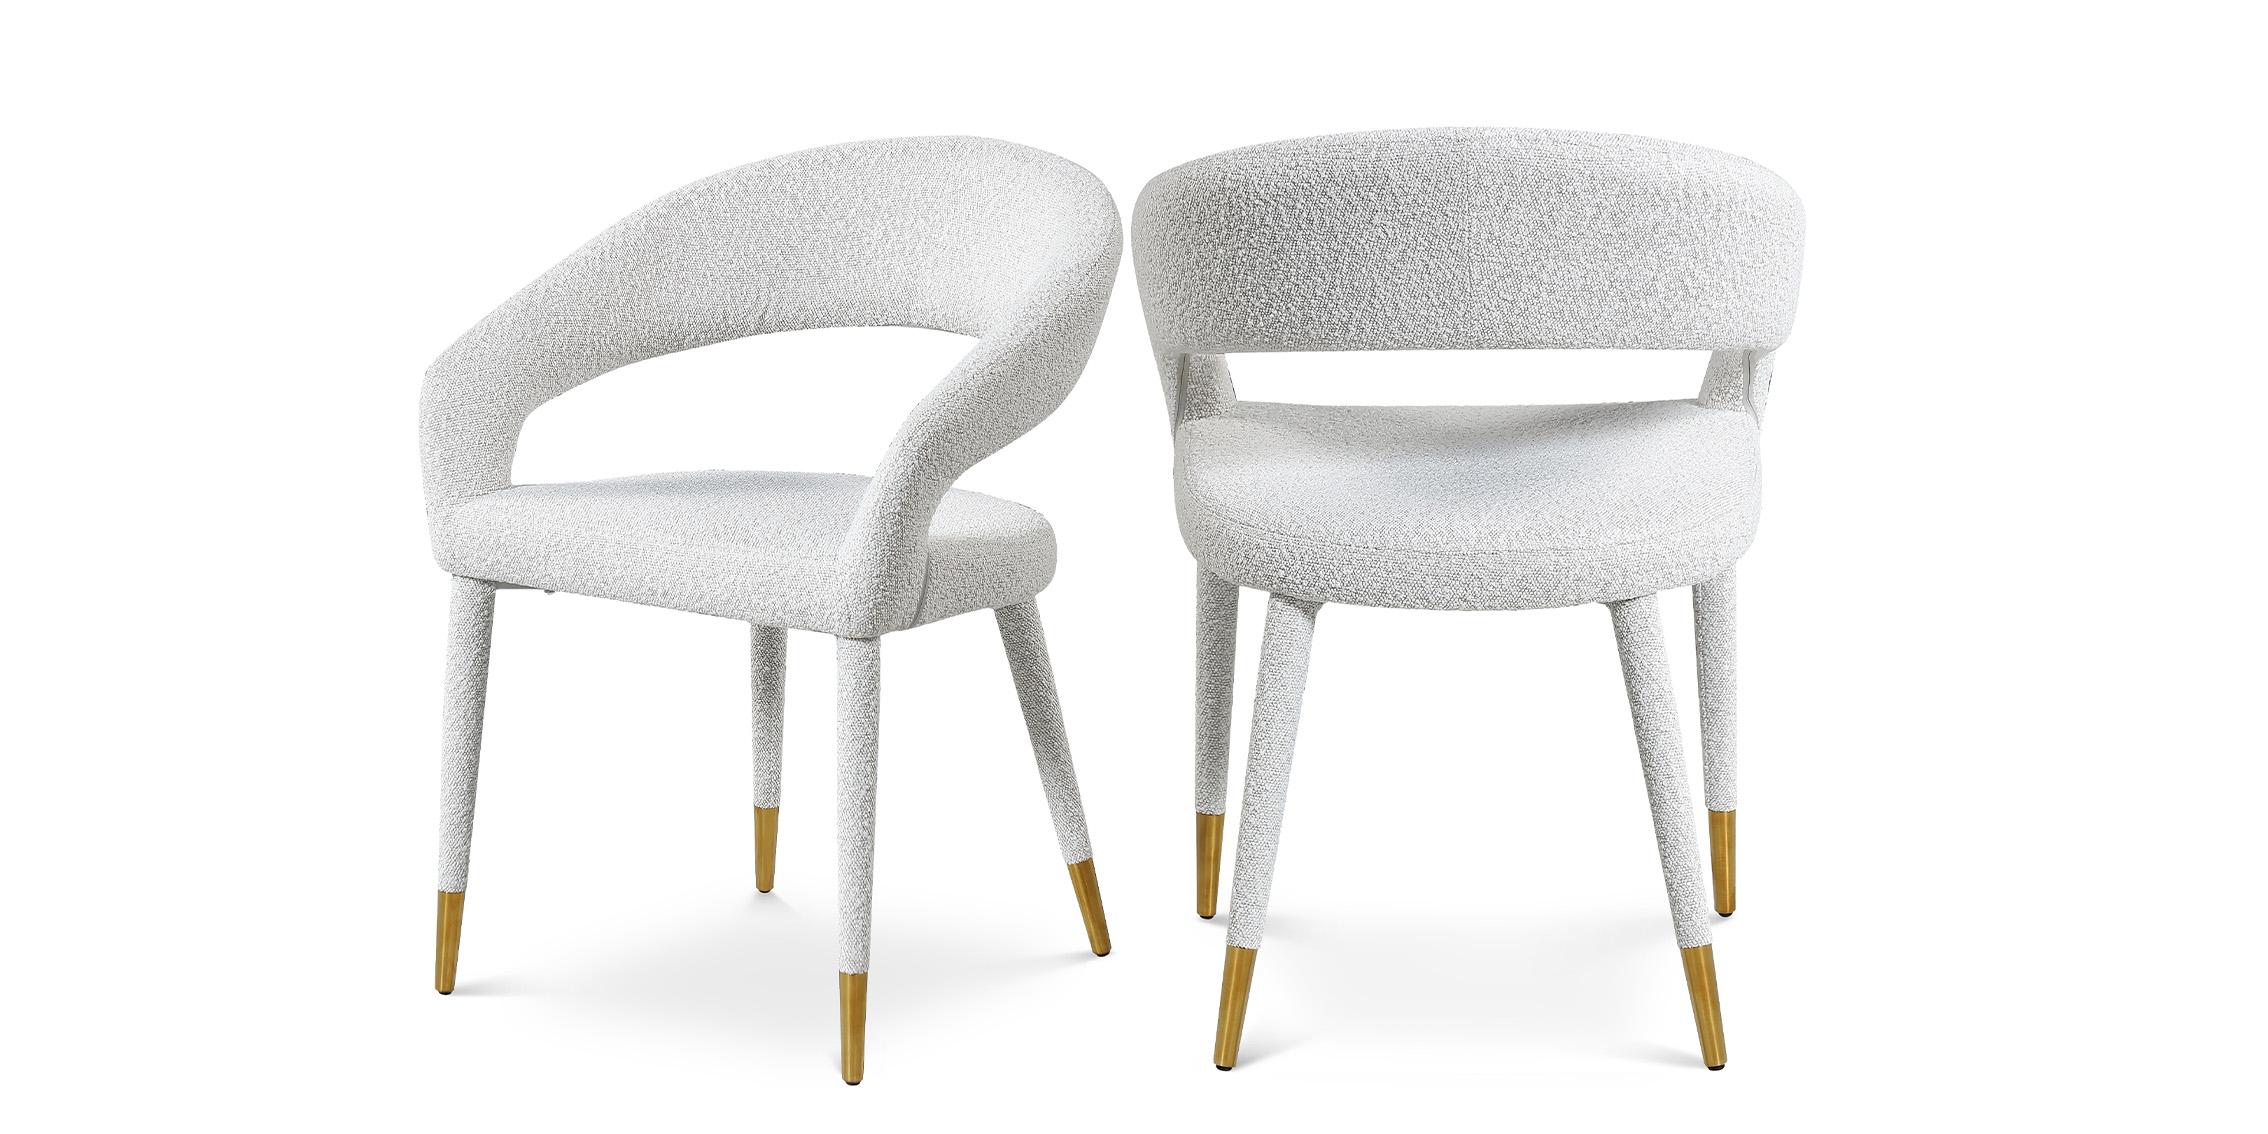 Maye Beige Boucle Chair Set Of 2,upholstered Dining Chair With